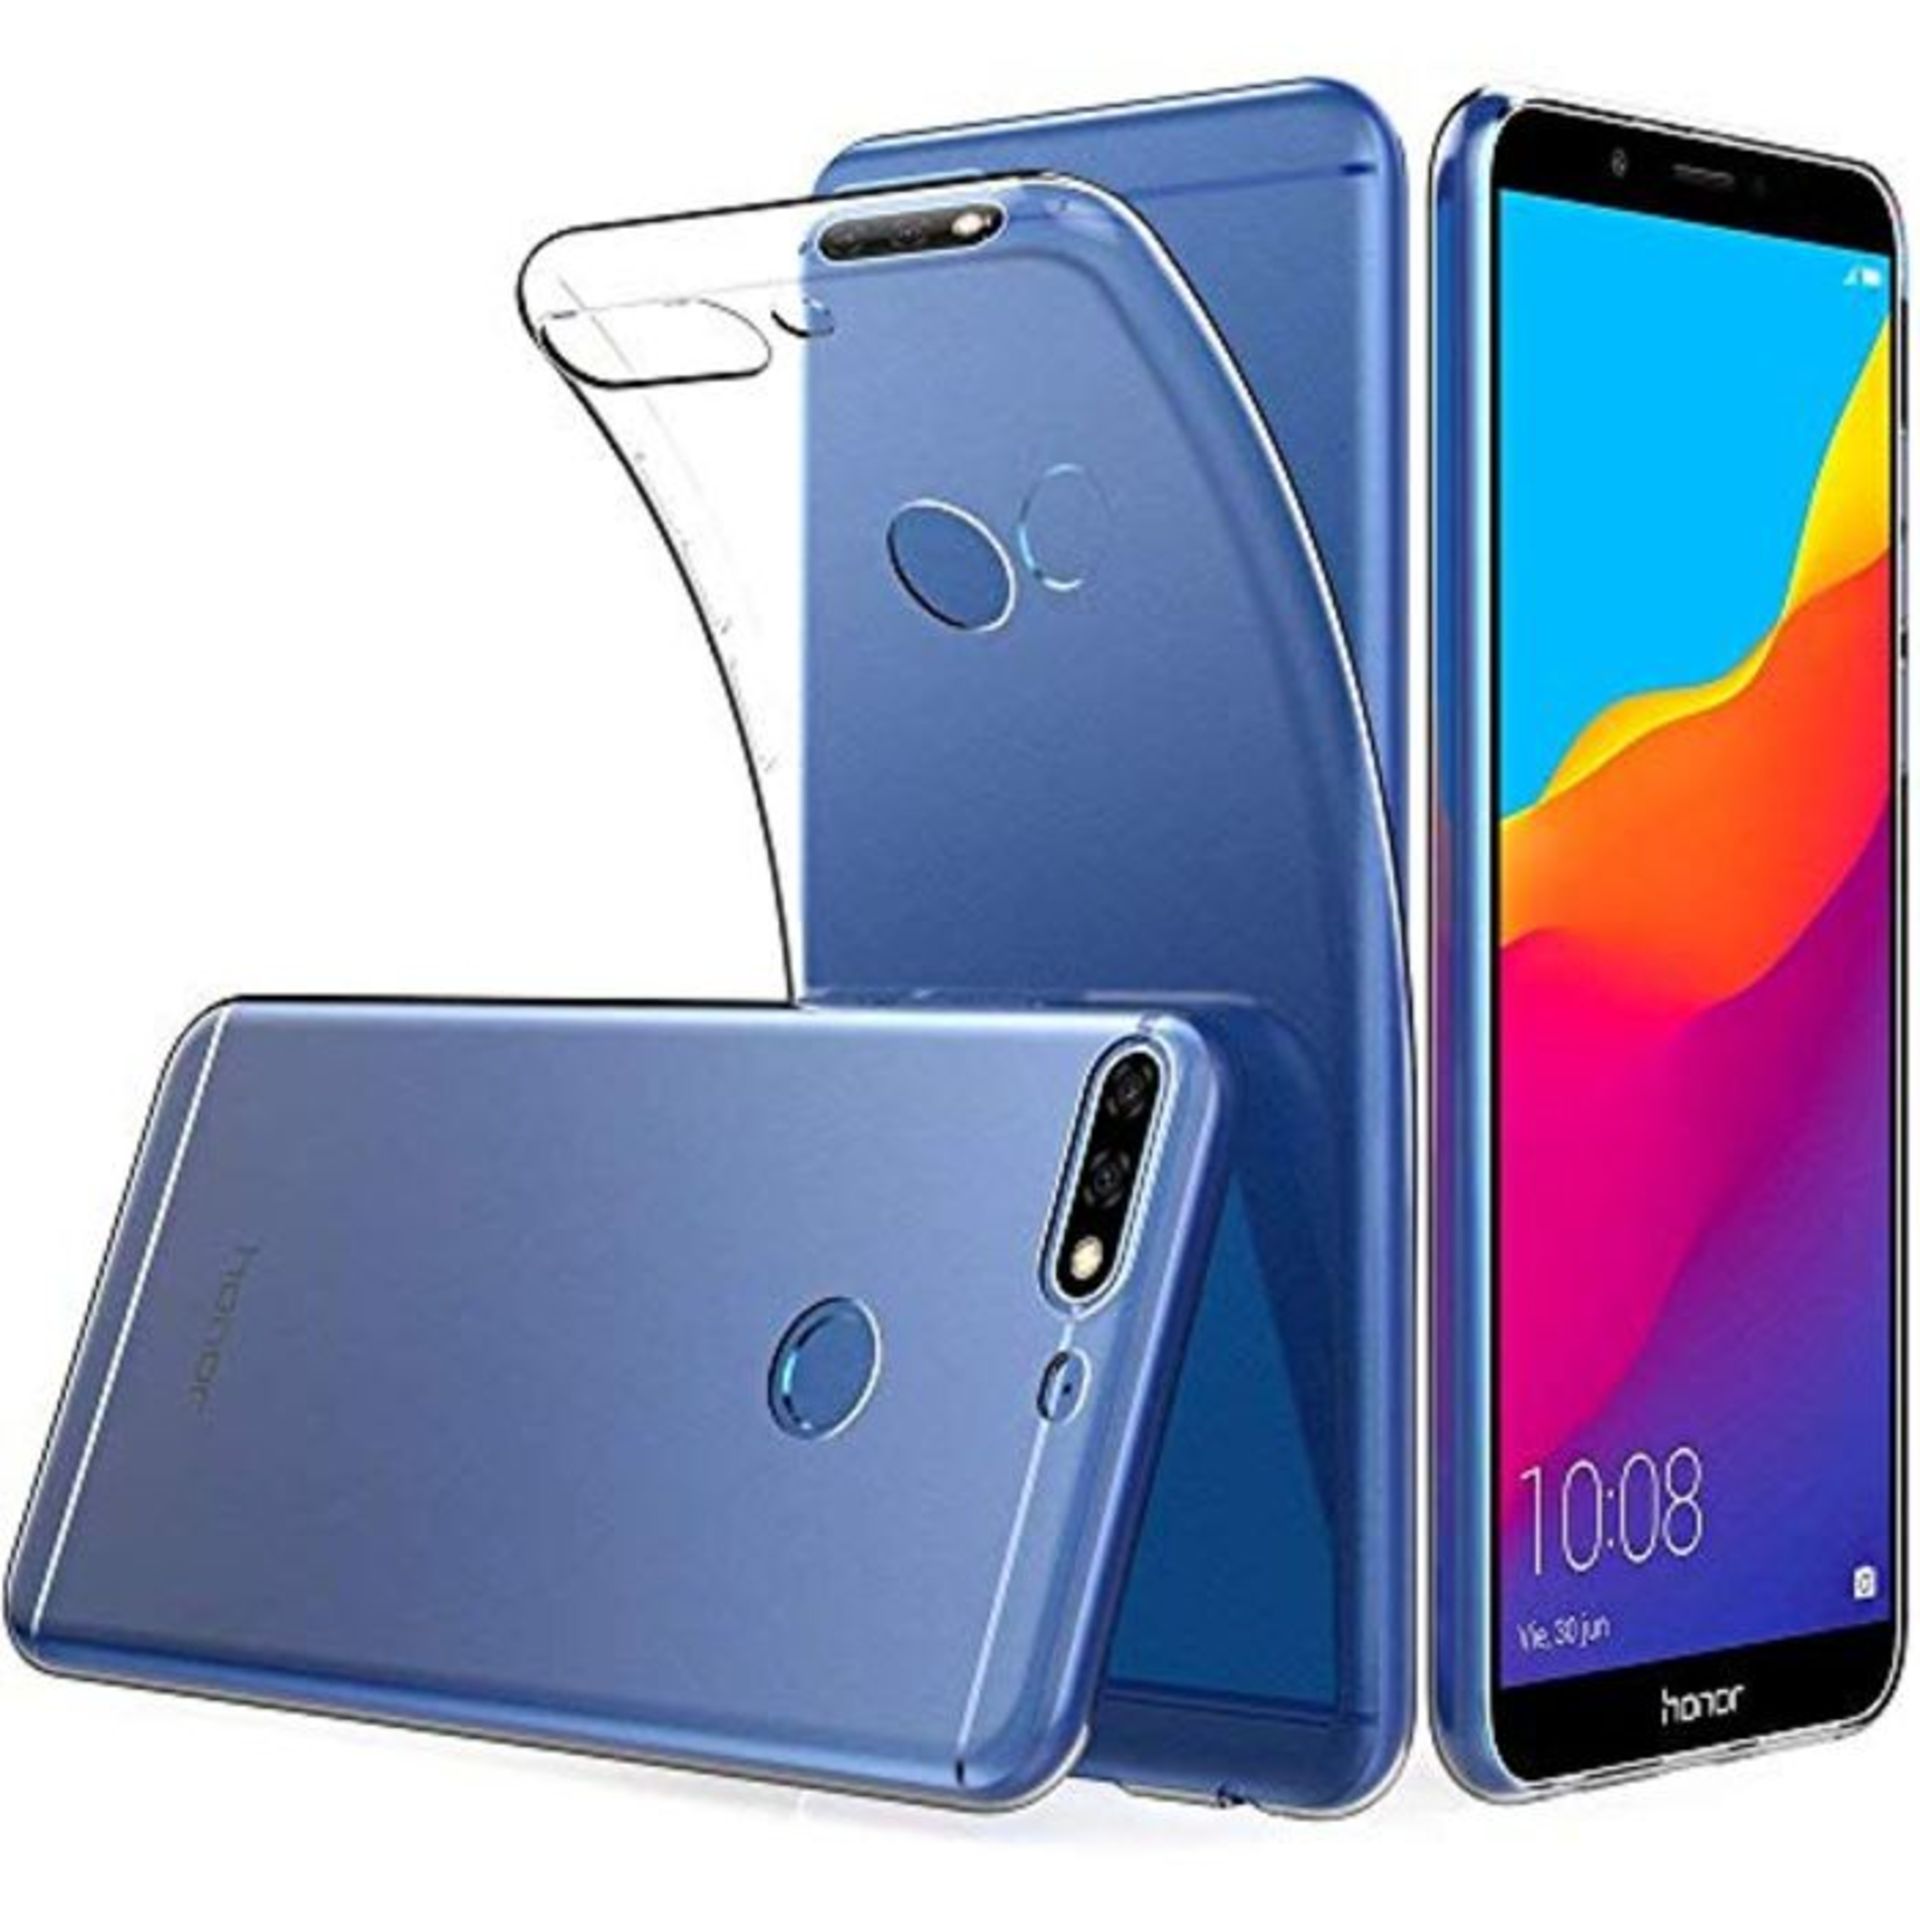 Soft TPU Transparent Fit Protector Case for Honor 7C, Huawei Y7 (2018), Anti Slip, Scr